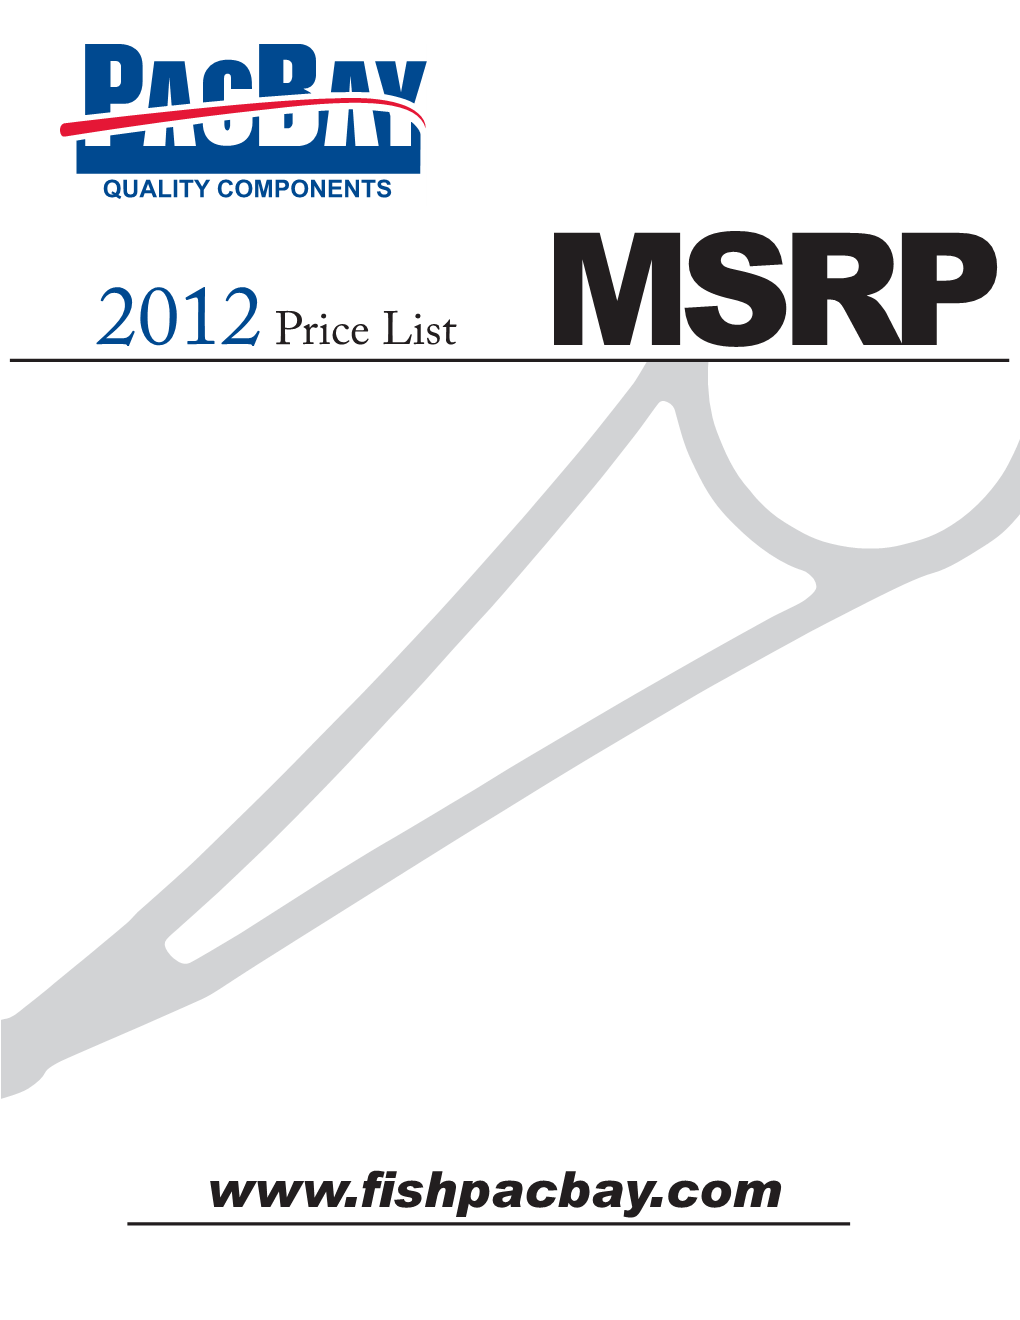 2012 Pacbay Price List MSRP